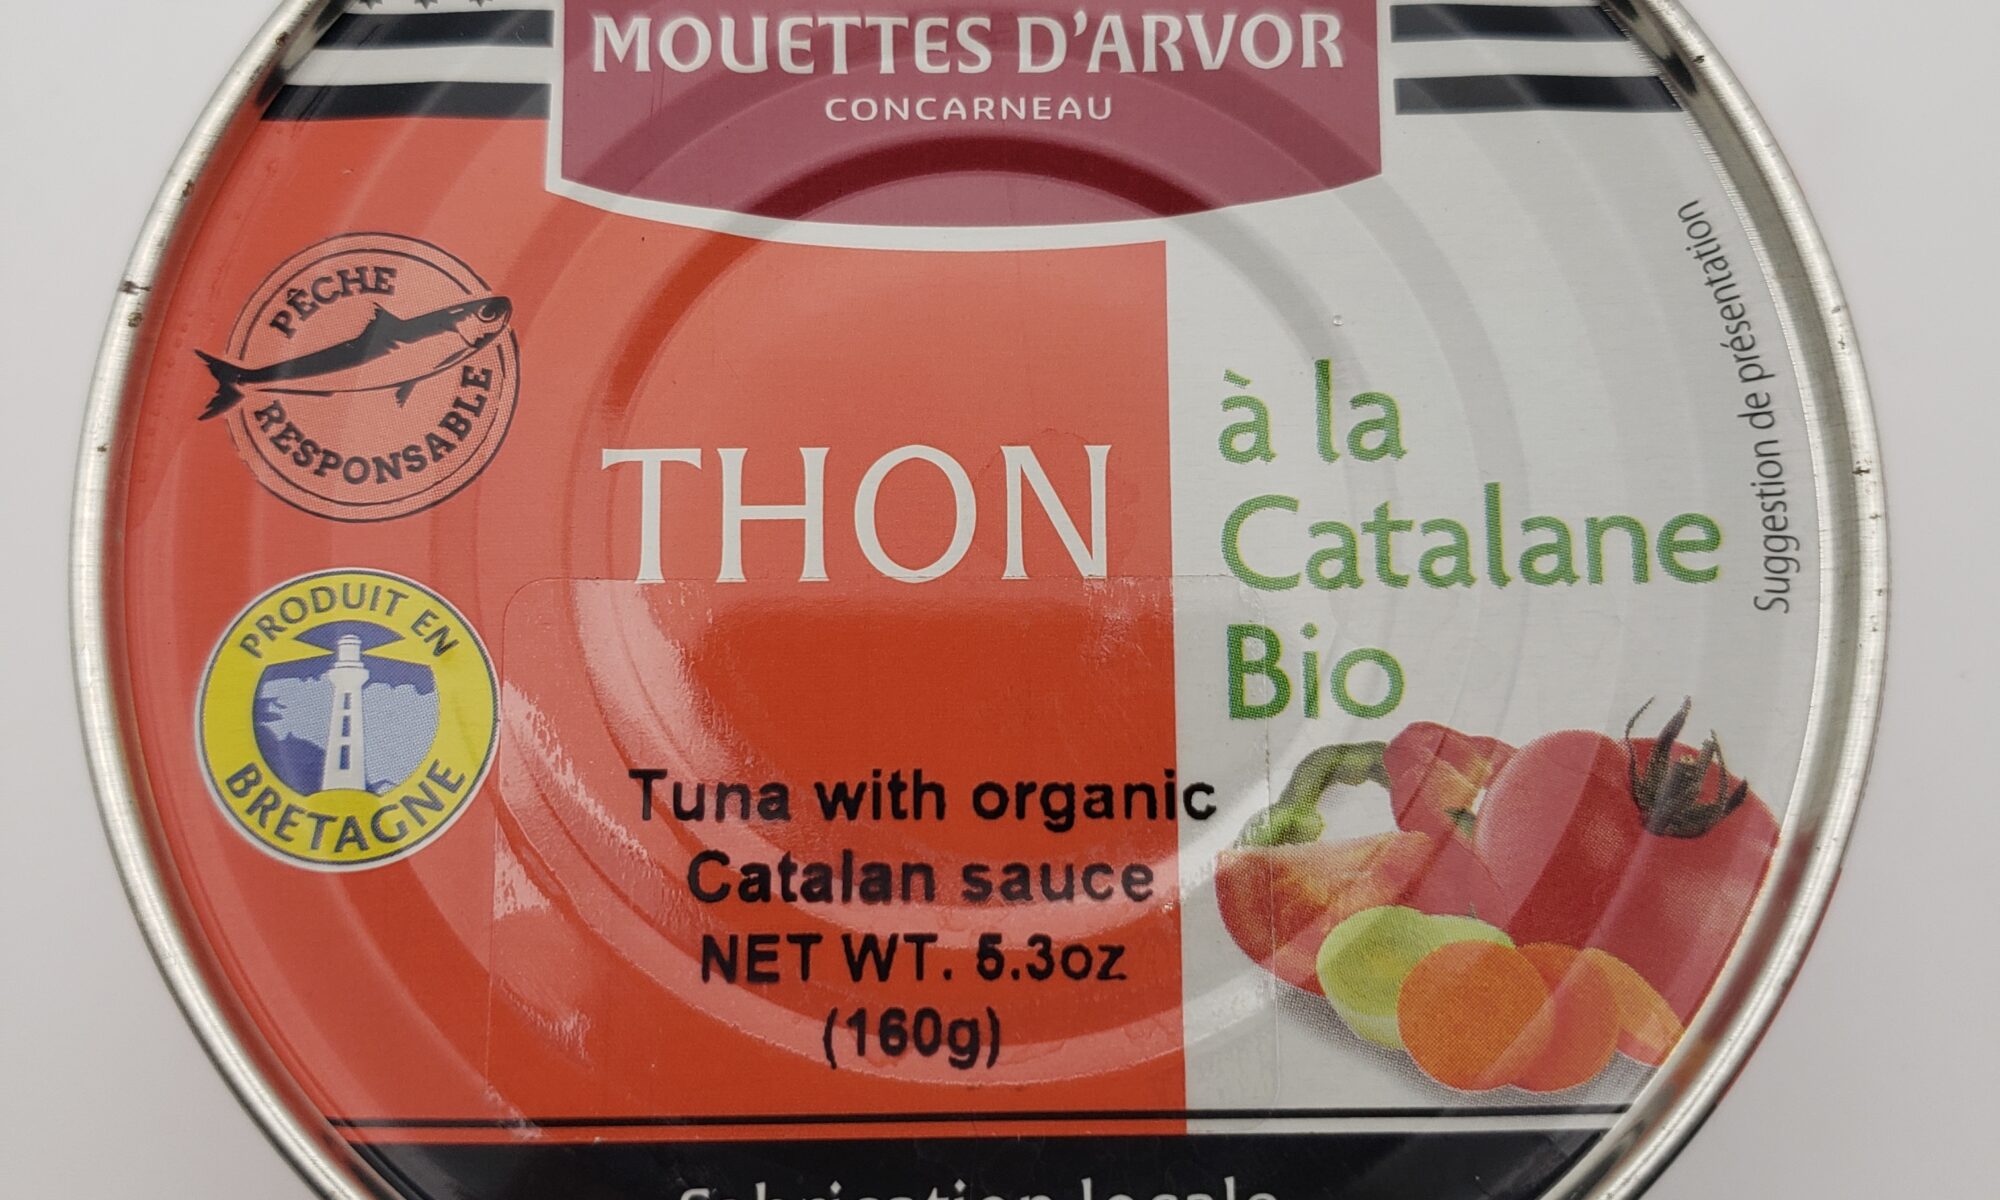 Image of Mouettes d'arvor tuna with catalan sauce